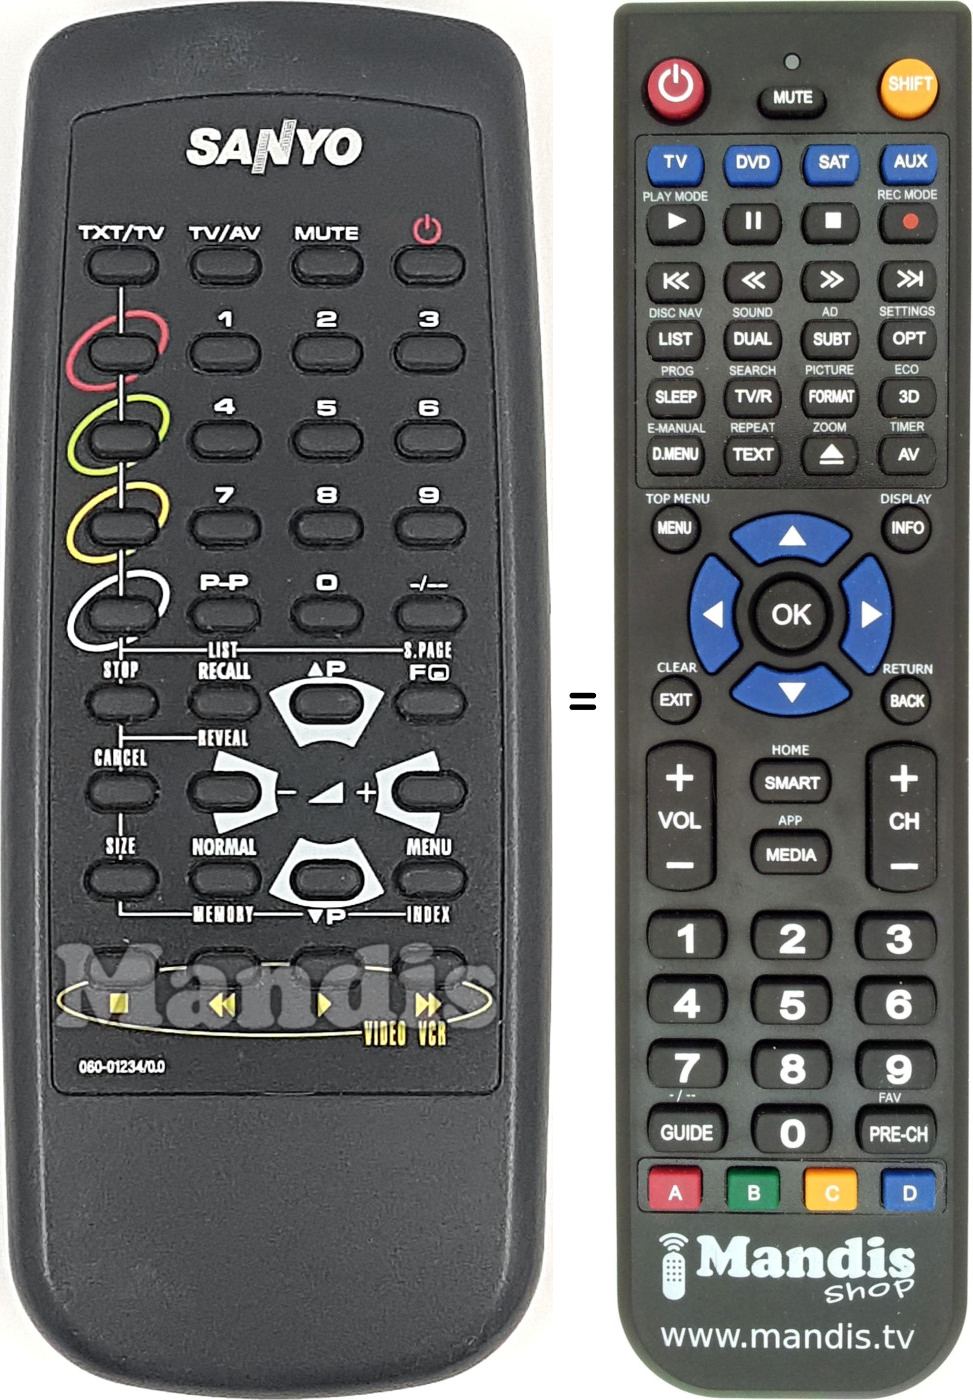 Replacement remote control Sanyo 060-012340.0